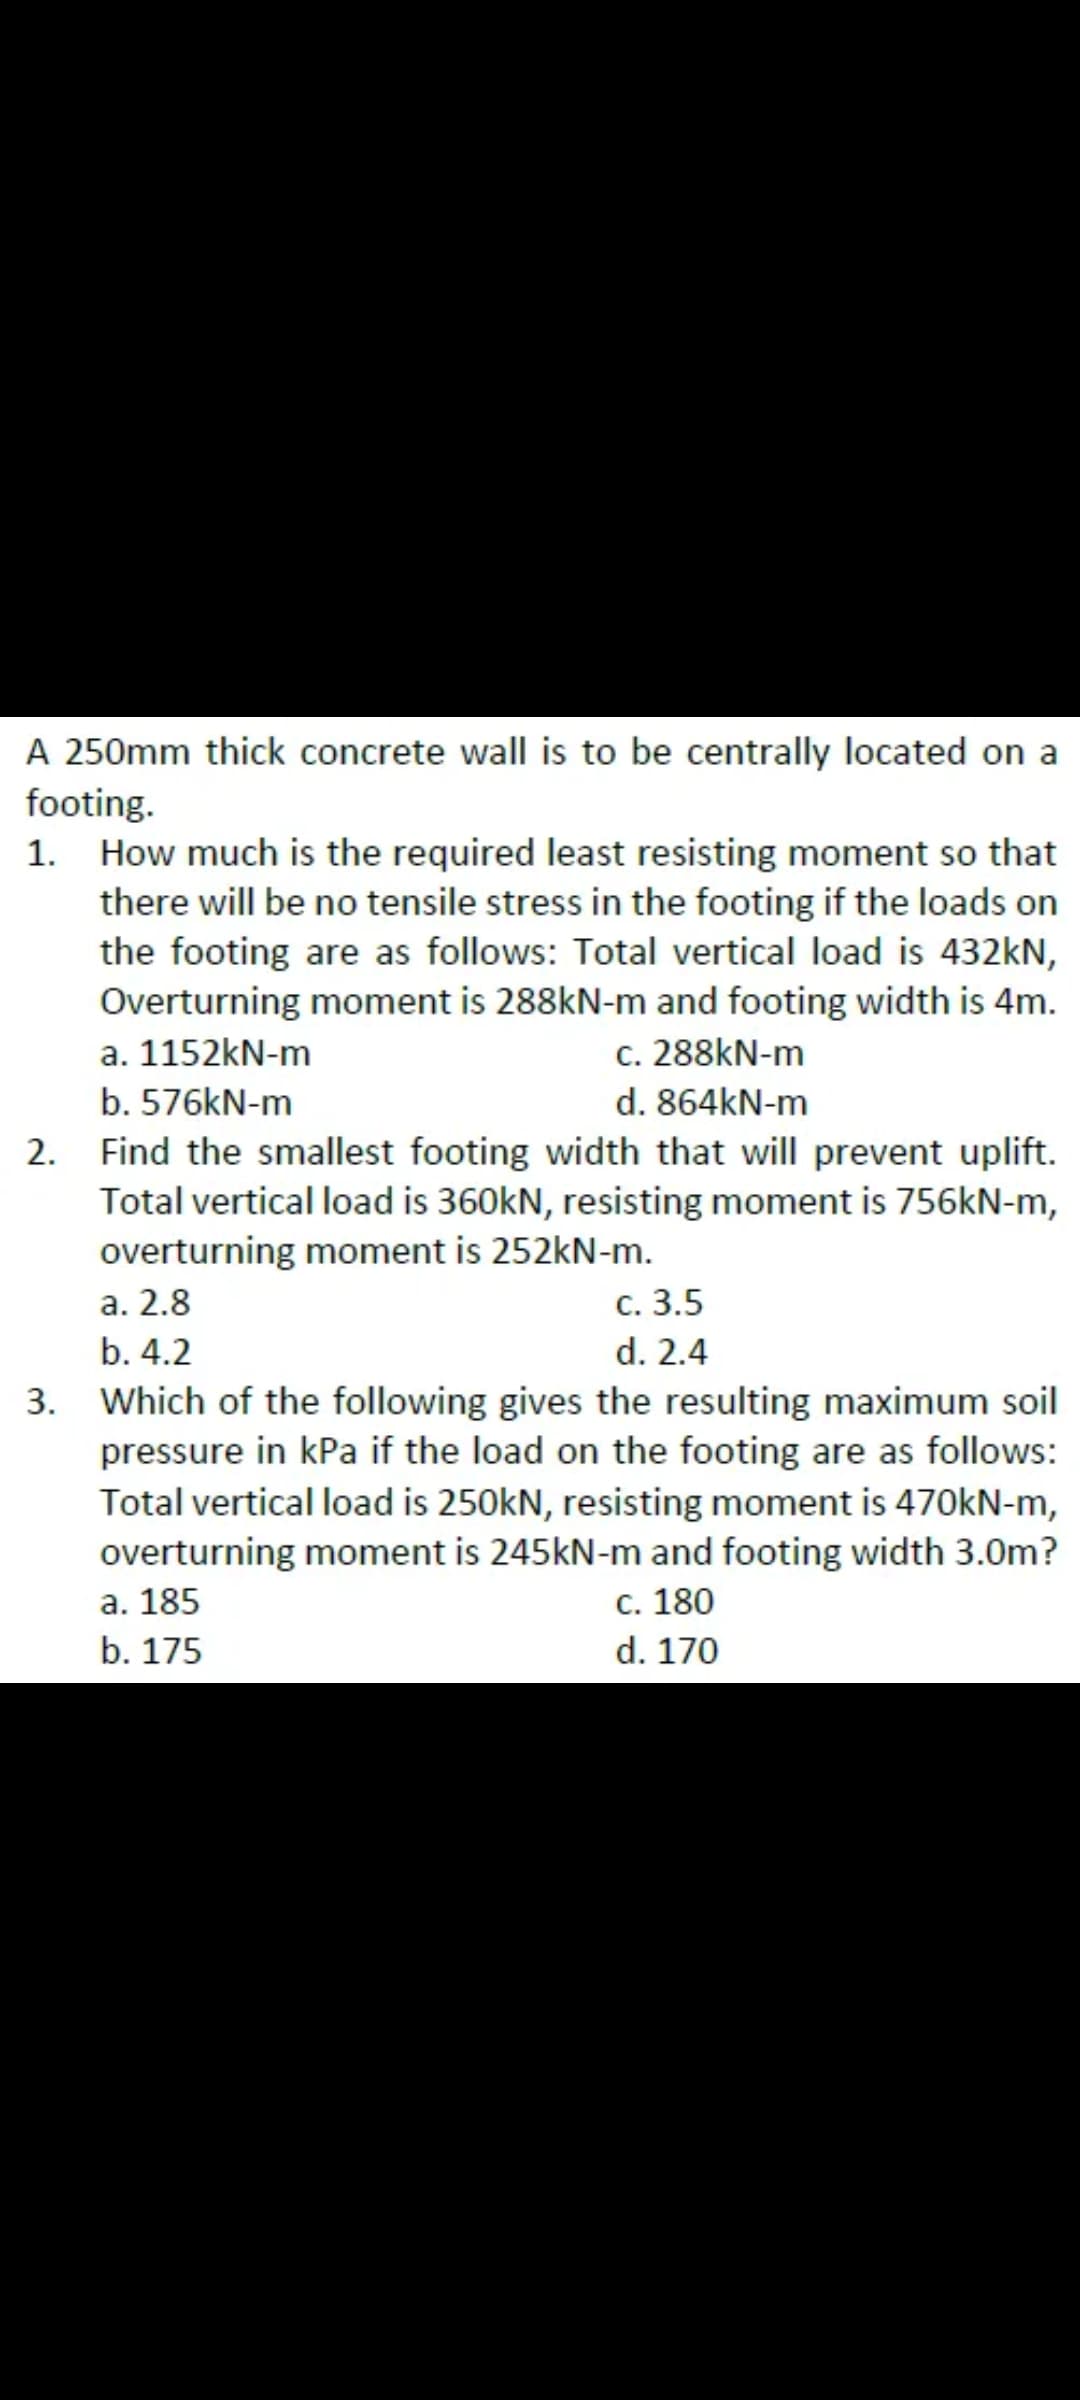 A 250mm thick concrete wall is to be centrally located on a
footing.
How much is the required least resisting moment so that
there will be no tensile stress in the footing if the loads on
the footing are as follows: Total vertical load is 432kN,
Overturning moment is 288kN-m and footing width is 4m.
a. 1152kN-m
c. 288KN-m
b. 576kN-m
d. 864kN-m
Find the smallest footing width that will prevent uplift.
Total vertical load is 360kN, resisting moment is 756KN-m,
overturning moment is 252kN-m.
с. 3.5
d. 2.4
Which of the following gives the resulting maximum soil
pressure in kPa if the load on the footing are as follows:
Total vertical load is 250kN, resisting moment is 470kN-m,
overturning moment is 245kN-m and footing width 3.0m?
с. 180
а. 2.8
b. 4.2
а. 185
b. 175
d. 170
